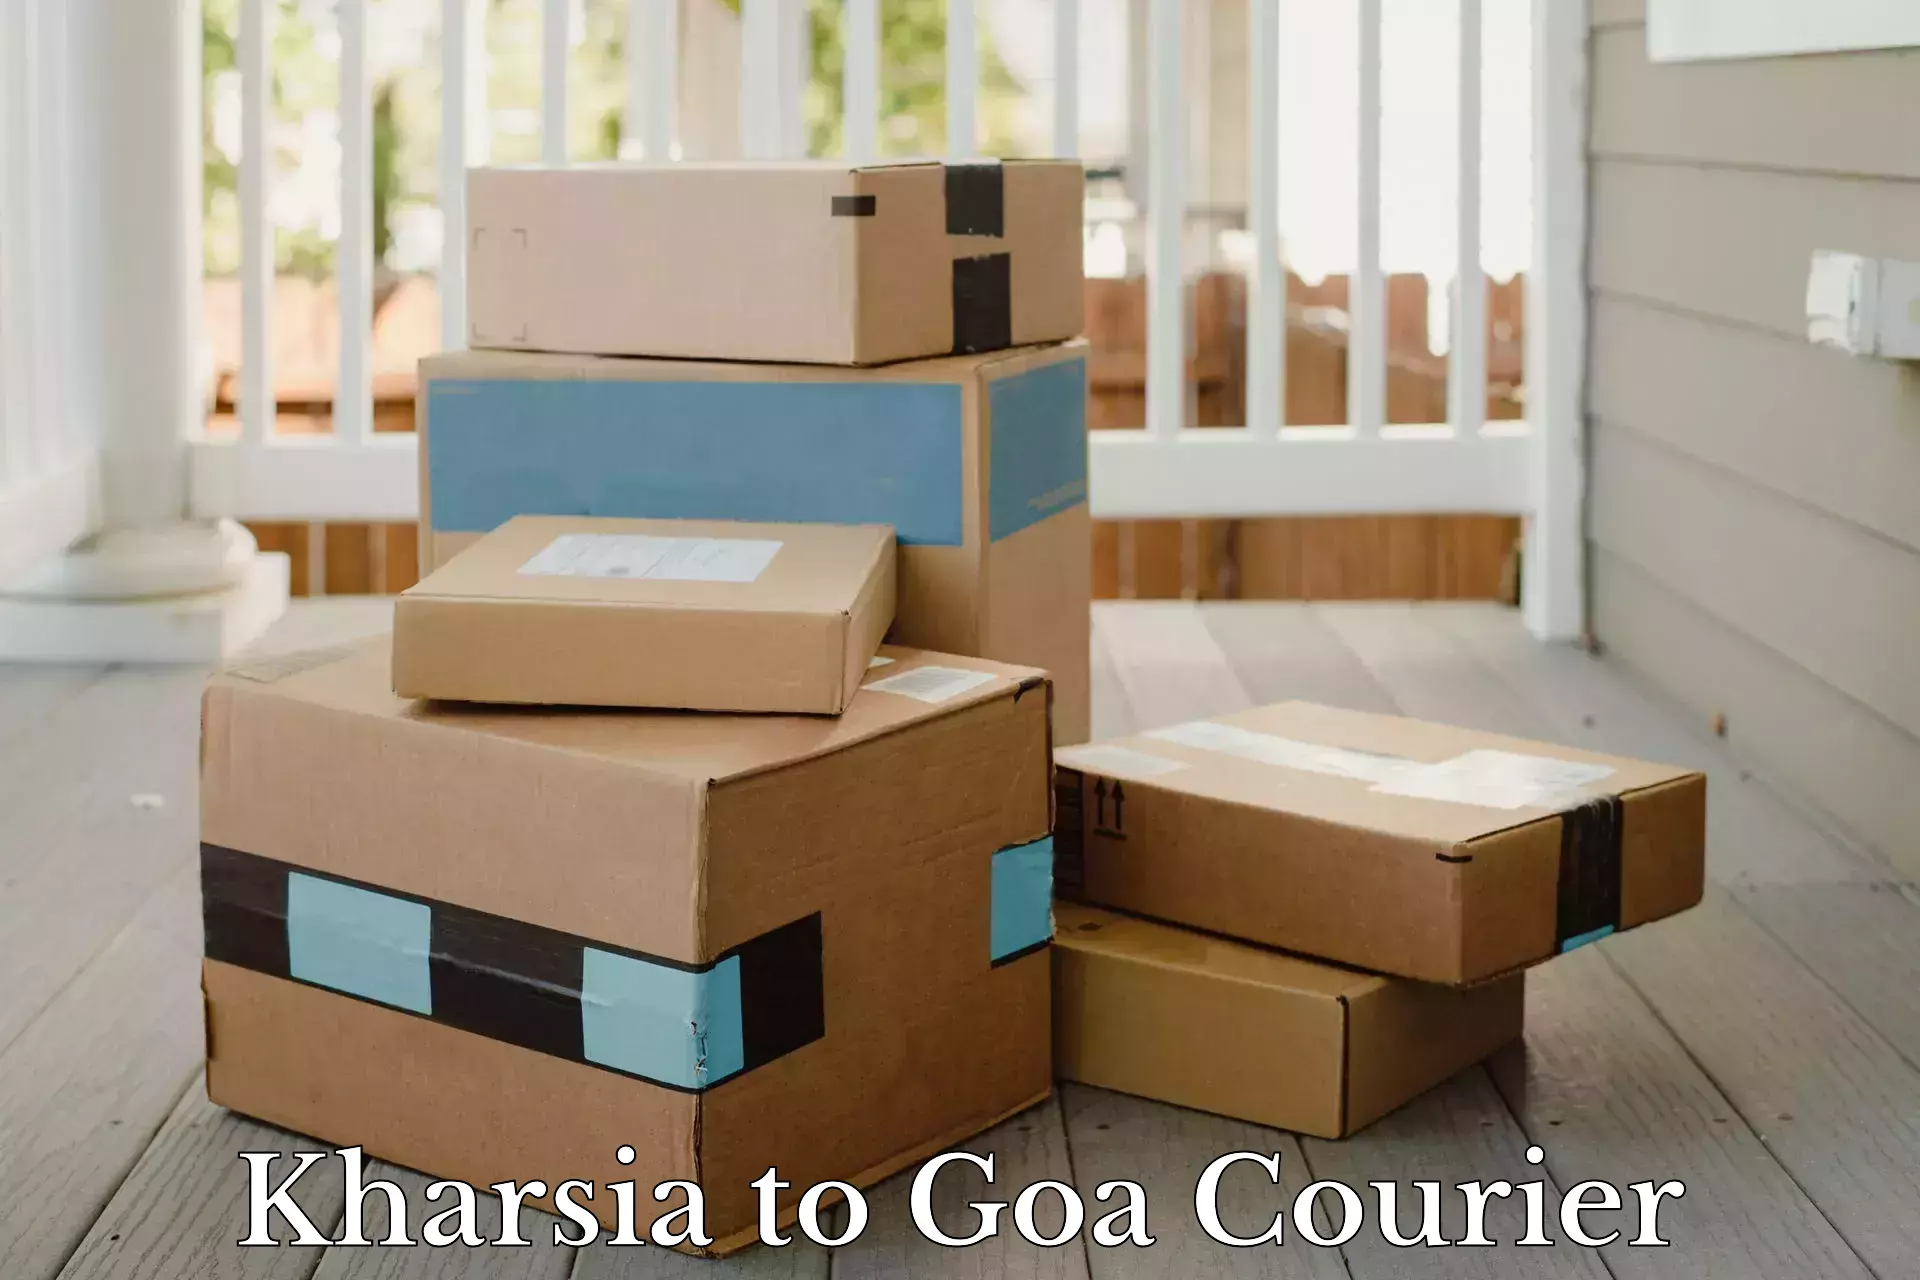 Automated parcel services Kharsia to Panaji